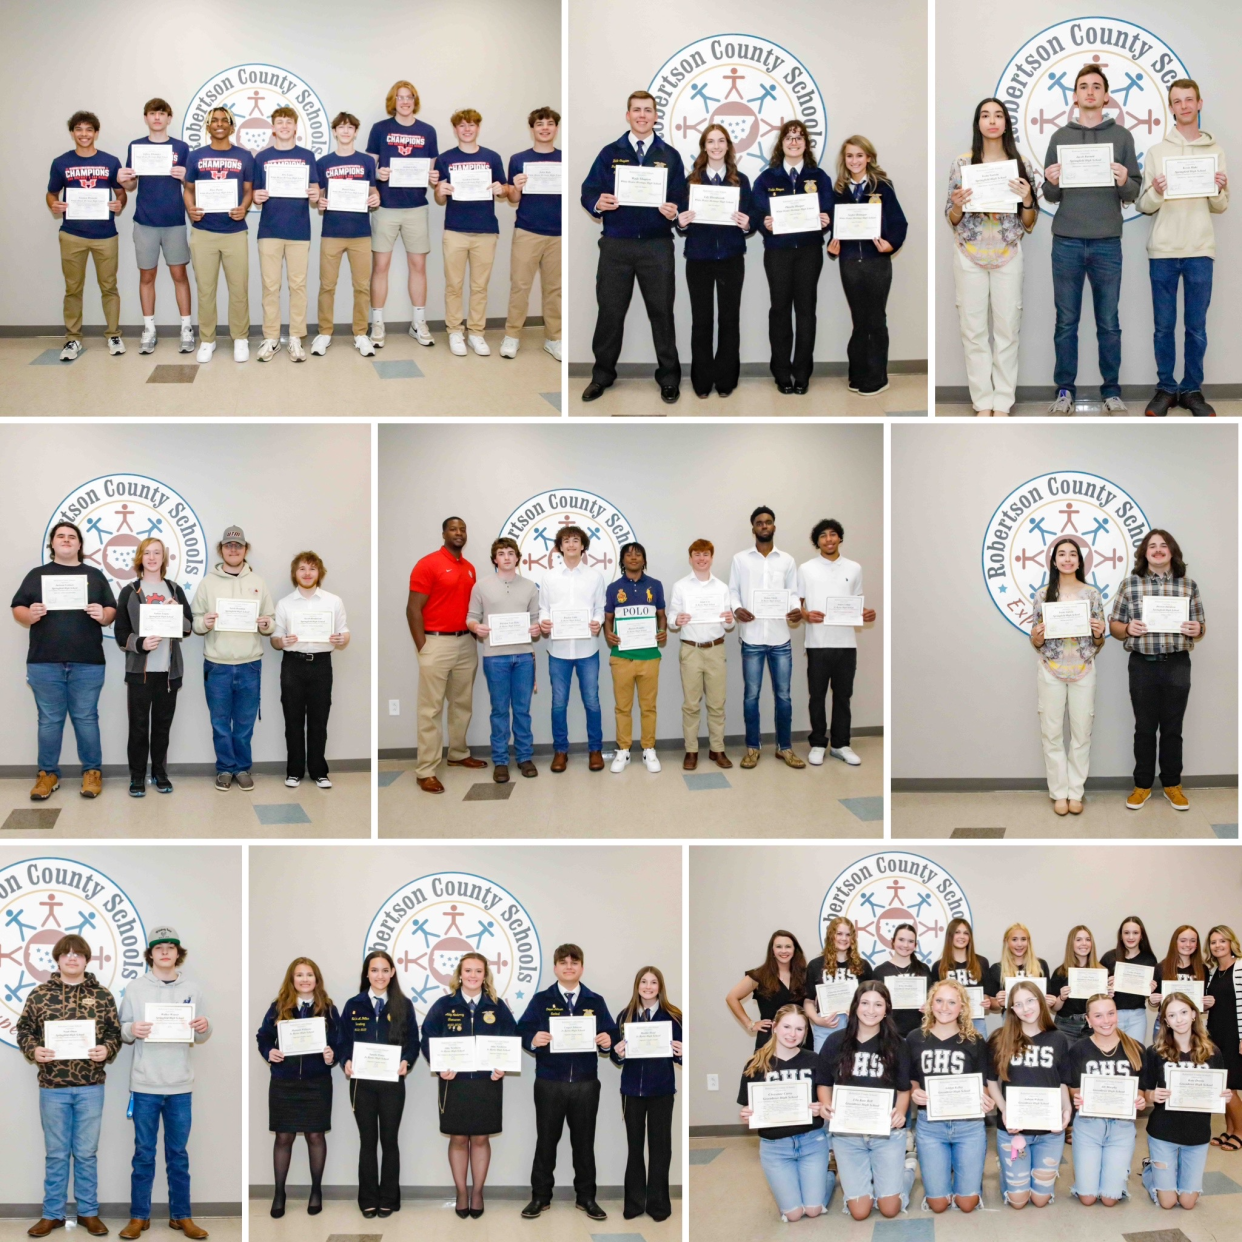 The Robertson County Board of Education met in a regular session on April 8 to recognize more than 100 students across the district for their varying achievement, abilities and honors.